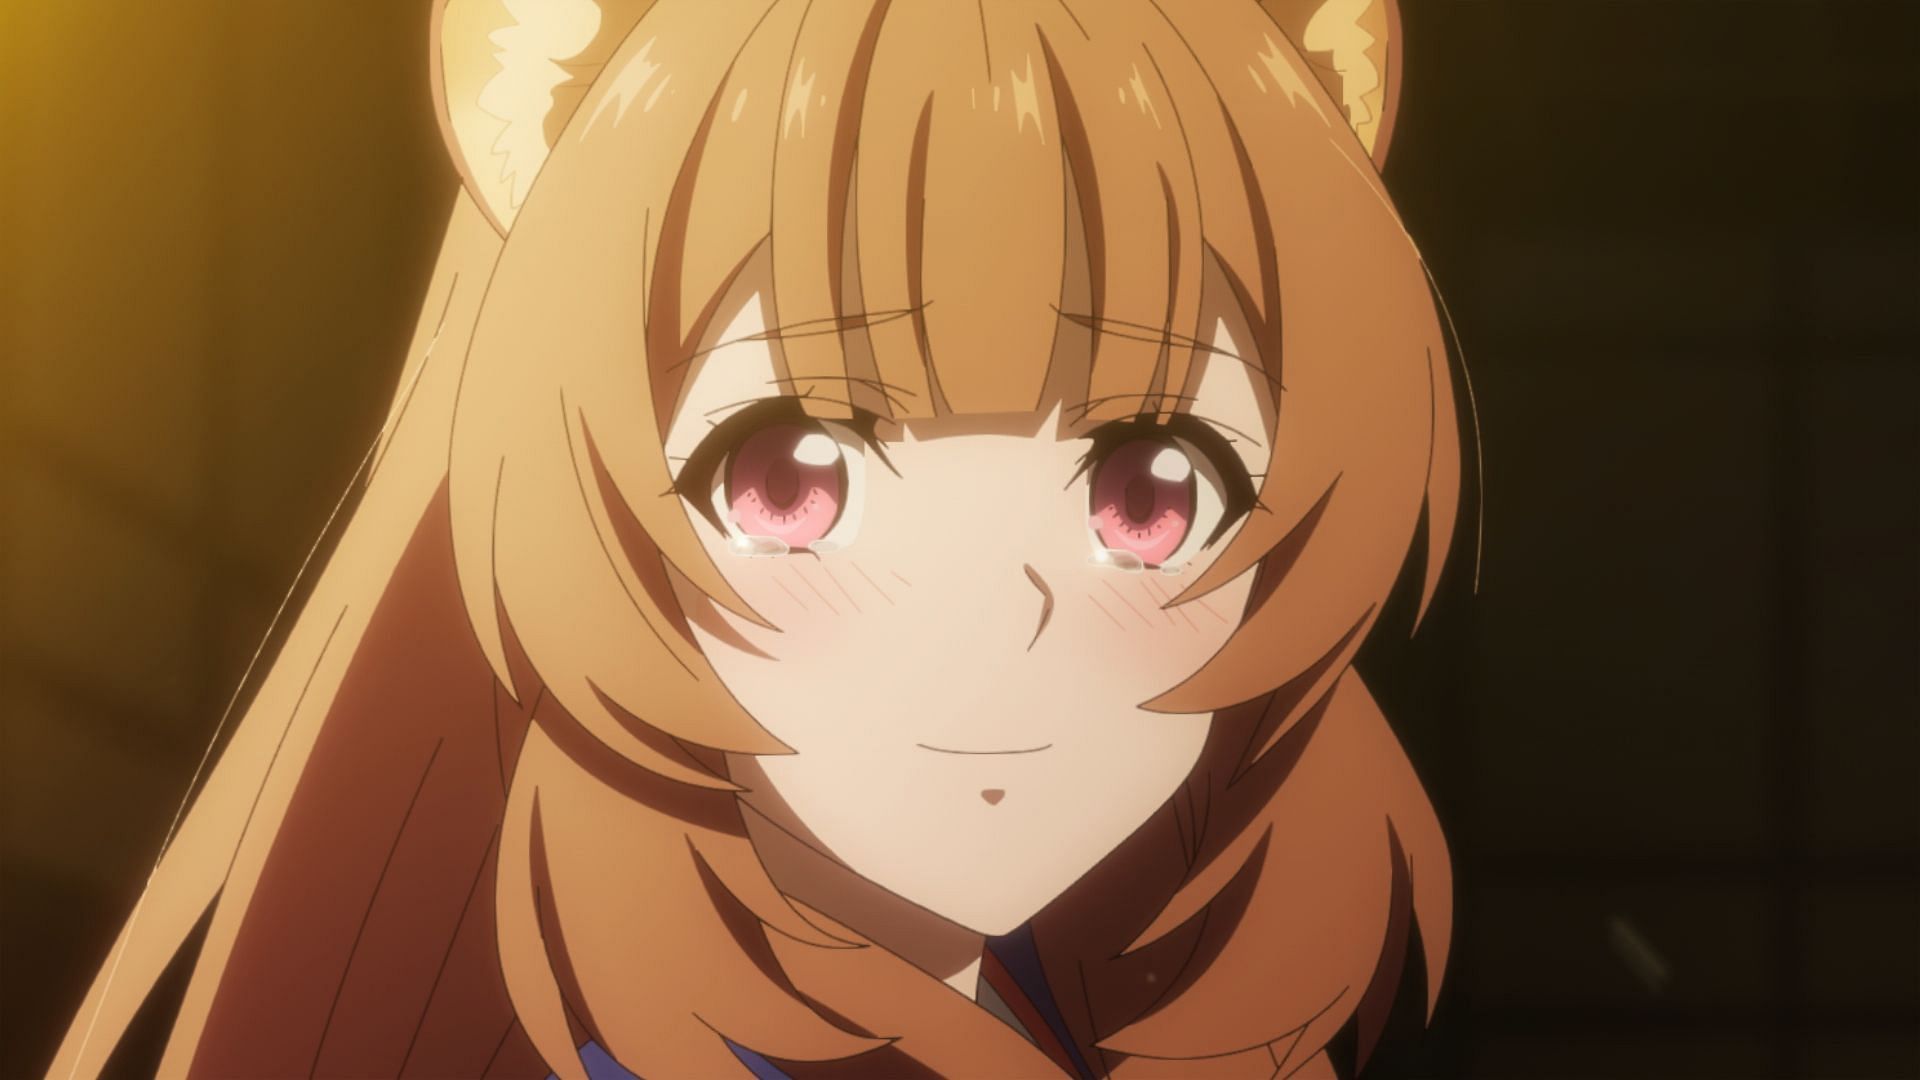 Rising of the Shield Hero Season 2 Episode 8 solely and rightfully puts the focus on Raphtalia (Image Credits: Aneko Yusagi/Media Factory, One Peace Books, Rising of the Shield Hero)